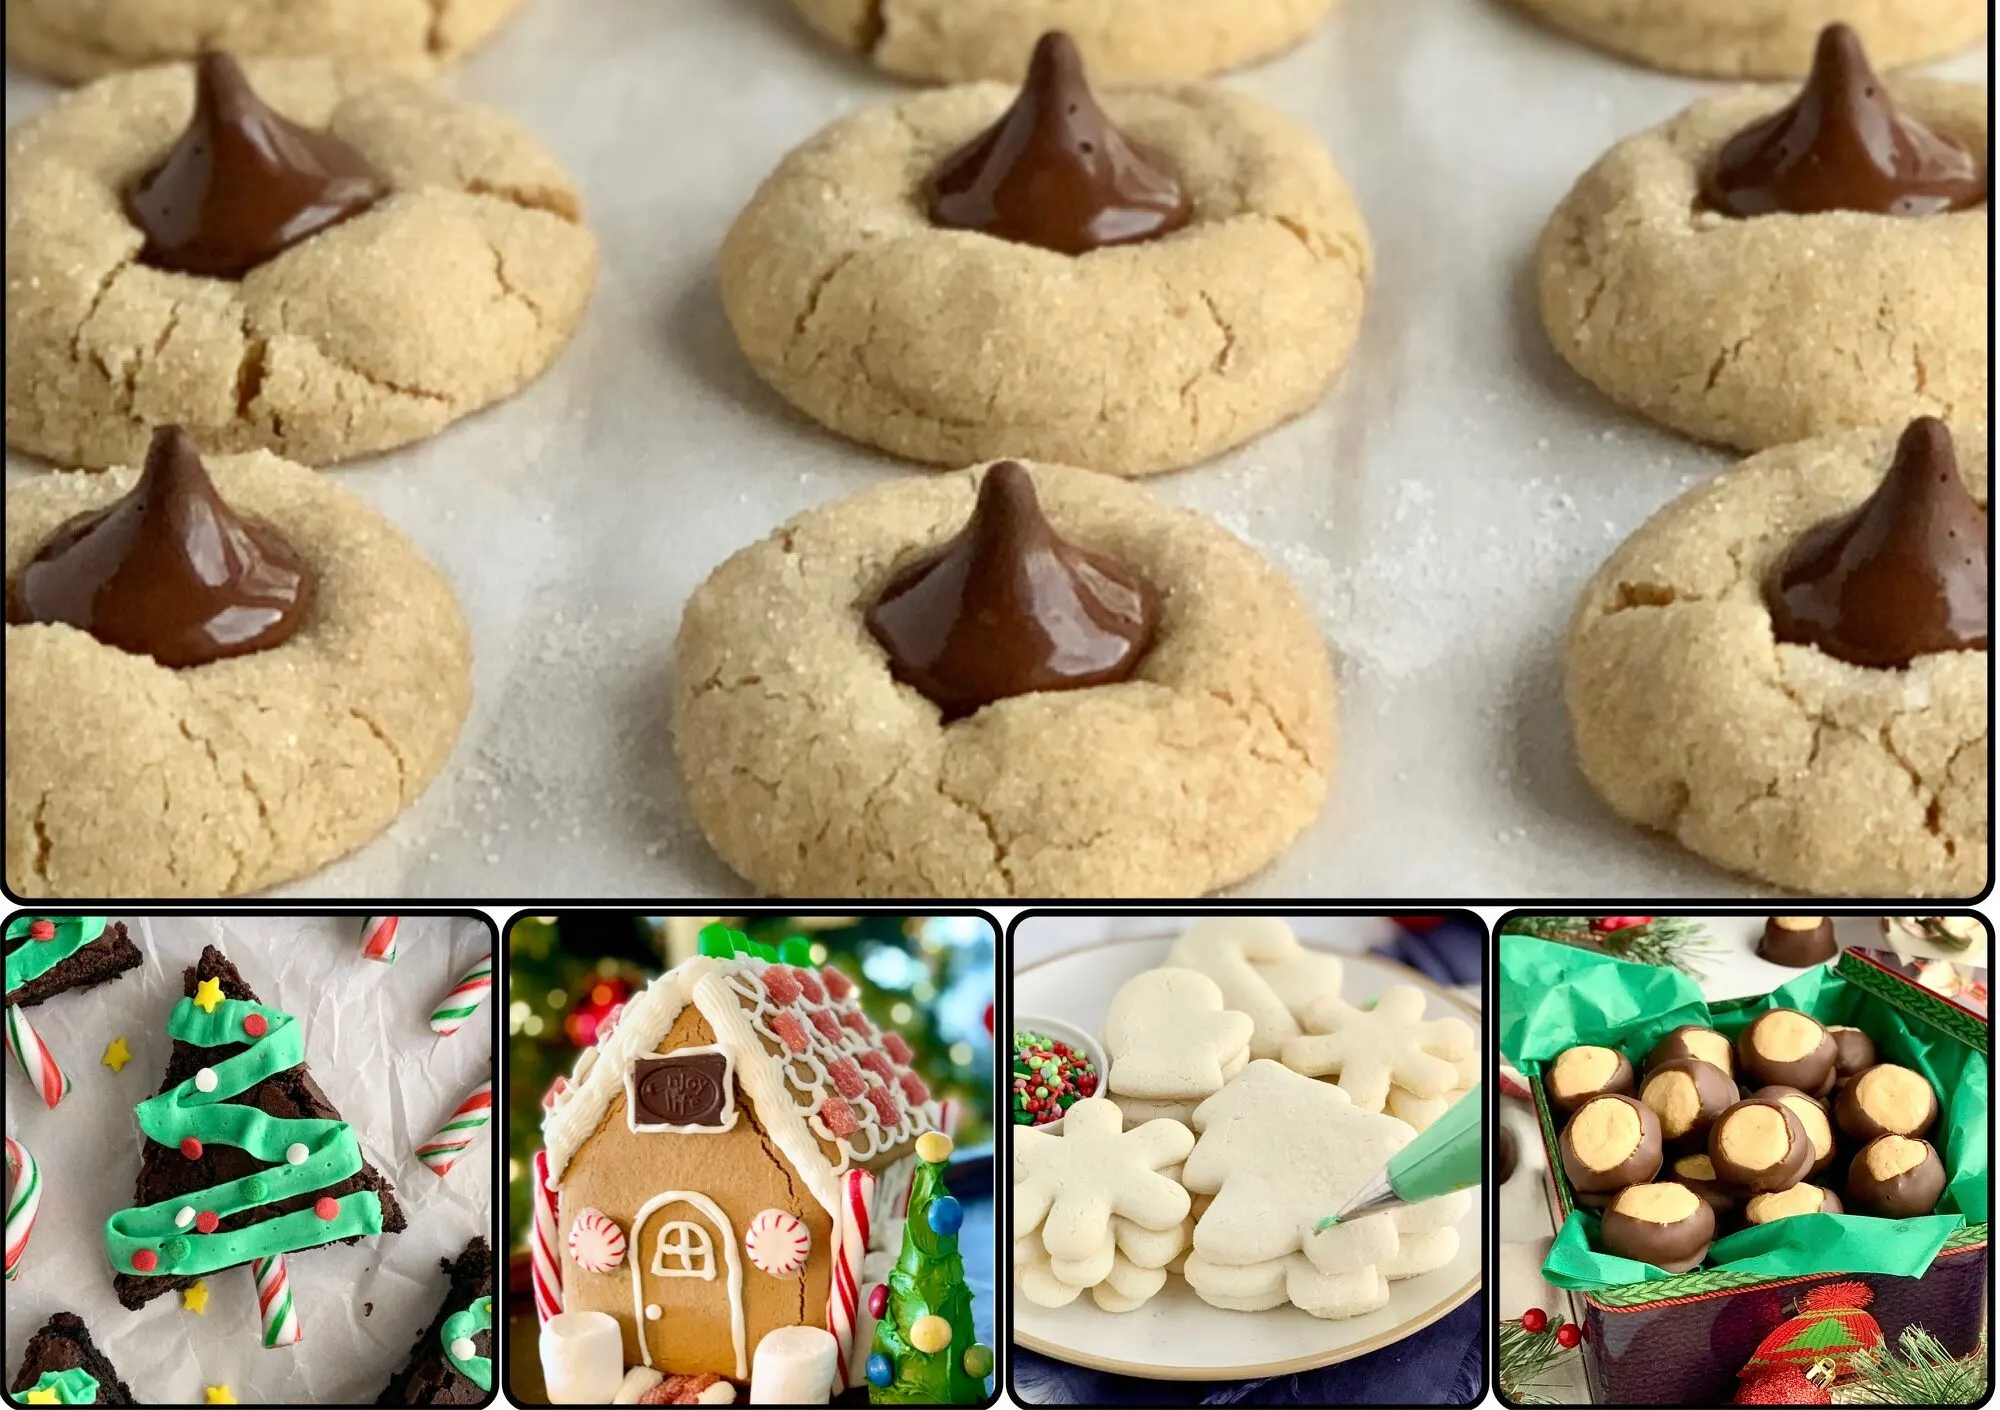 A collage of Christmas cookies, Gingerbread house, and icing sugar cookies.